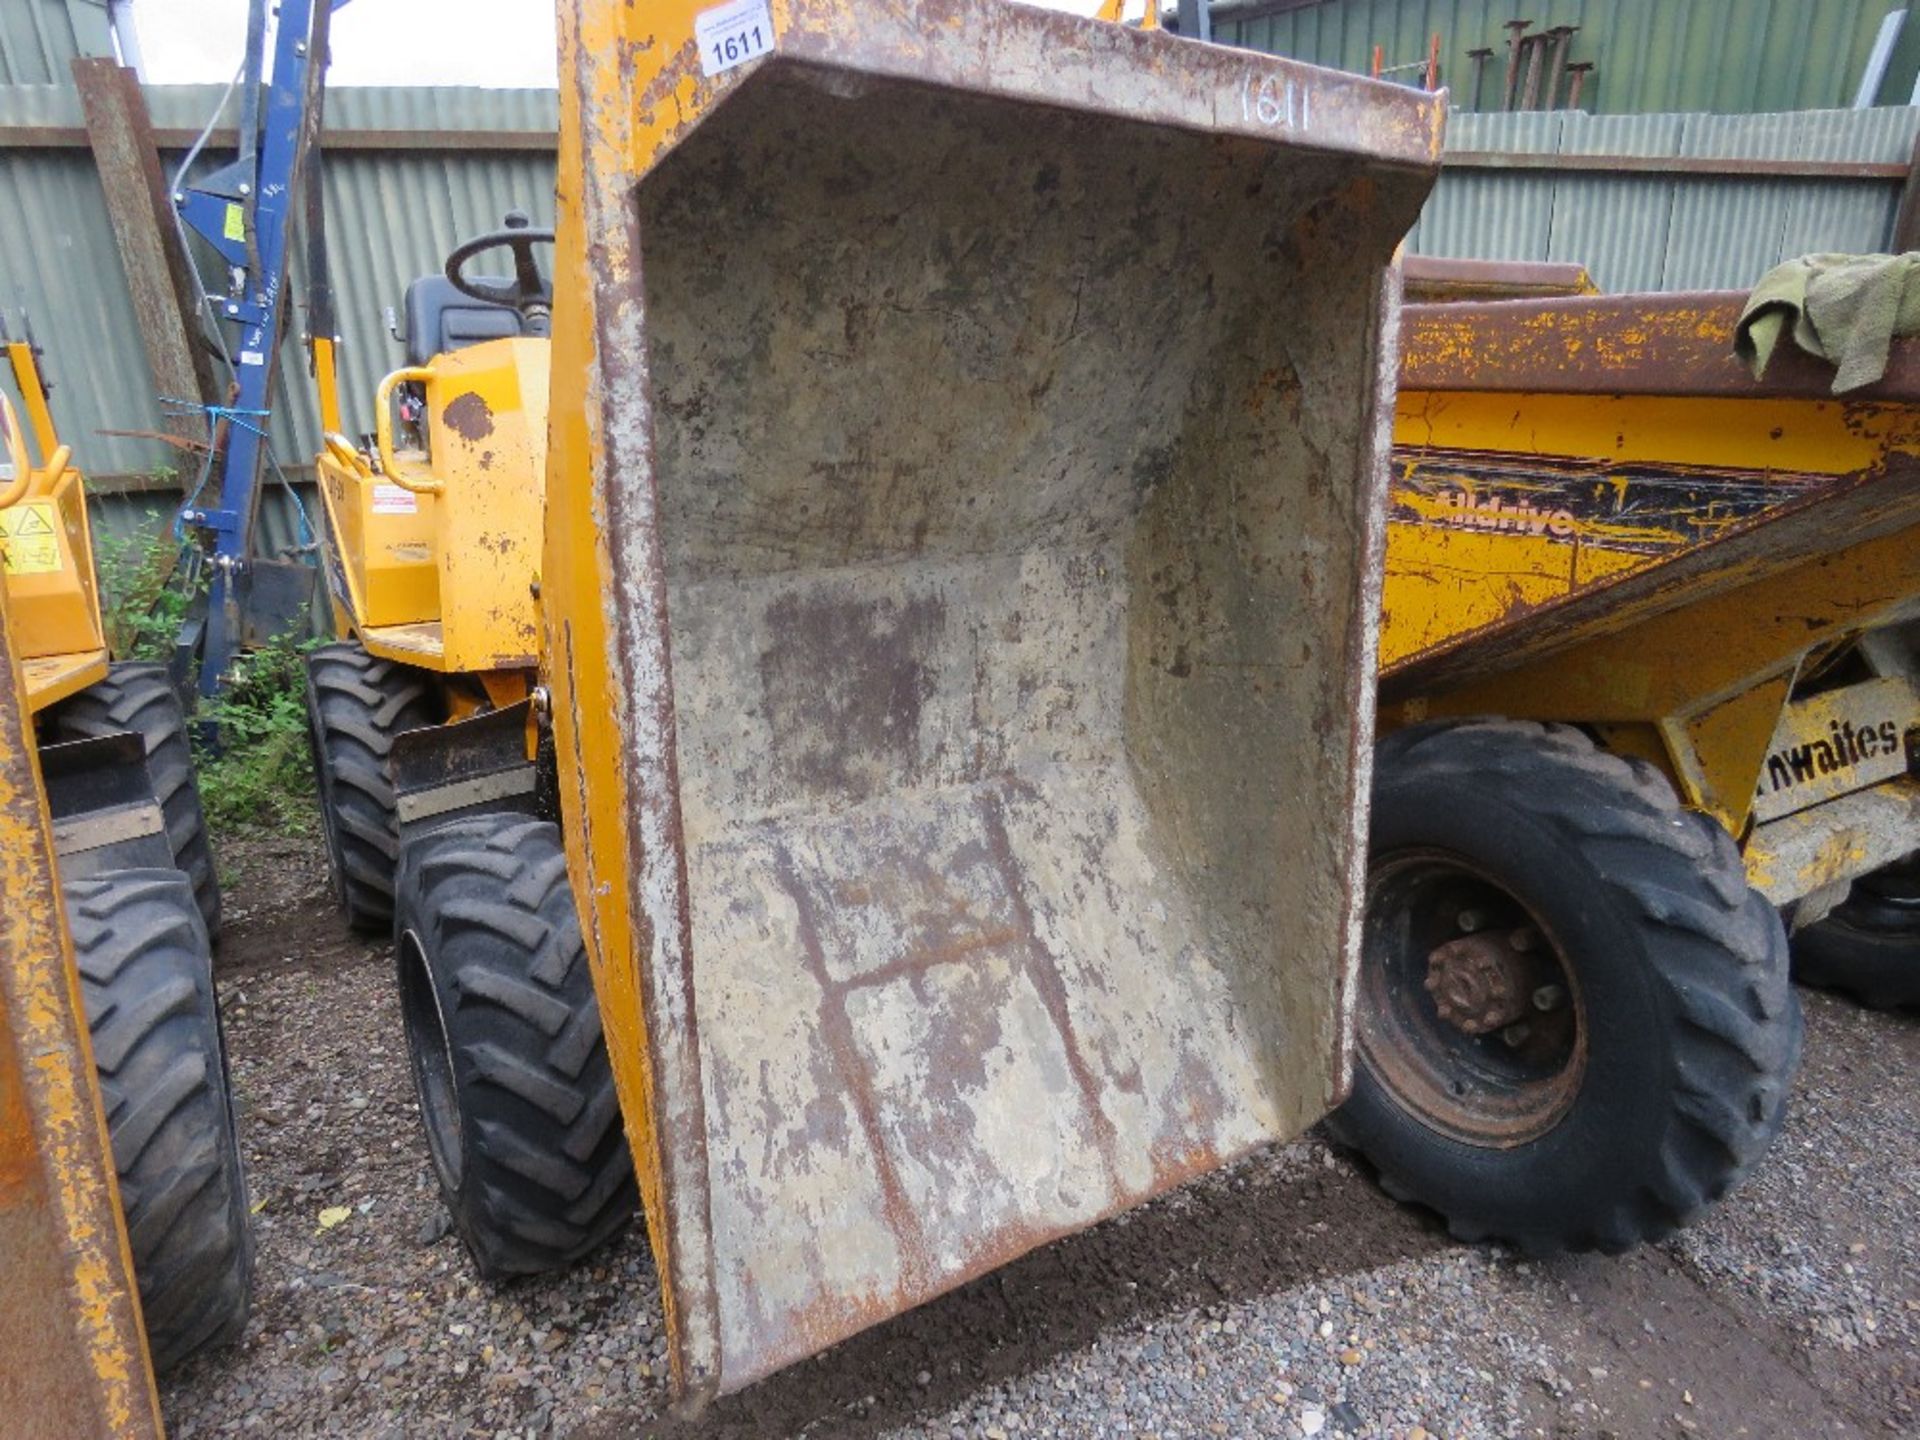 THWAITES HIGH TIP 1 TONNE DUMPER YEAR 2016. 1843 REC HRS. PN:DTI29 DIRECT FROM LOCAL COMPANY AS PAR - Image 2 of 8